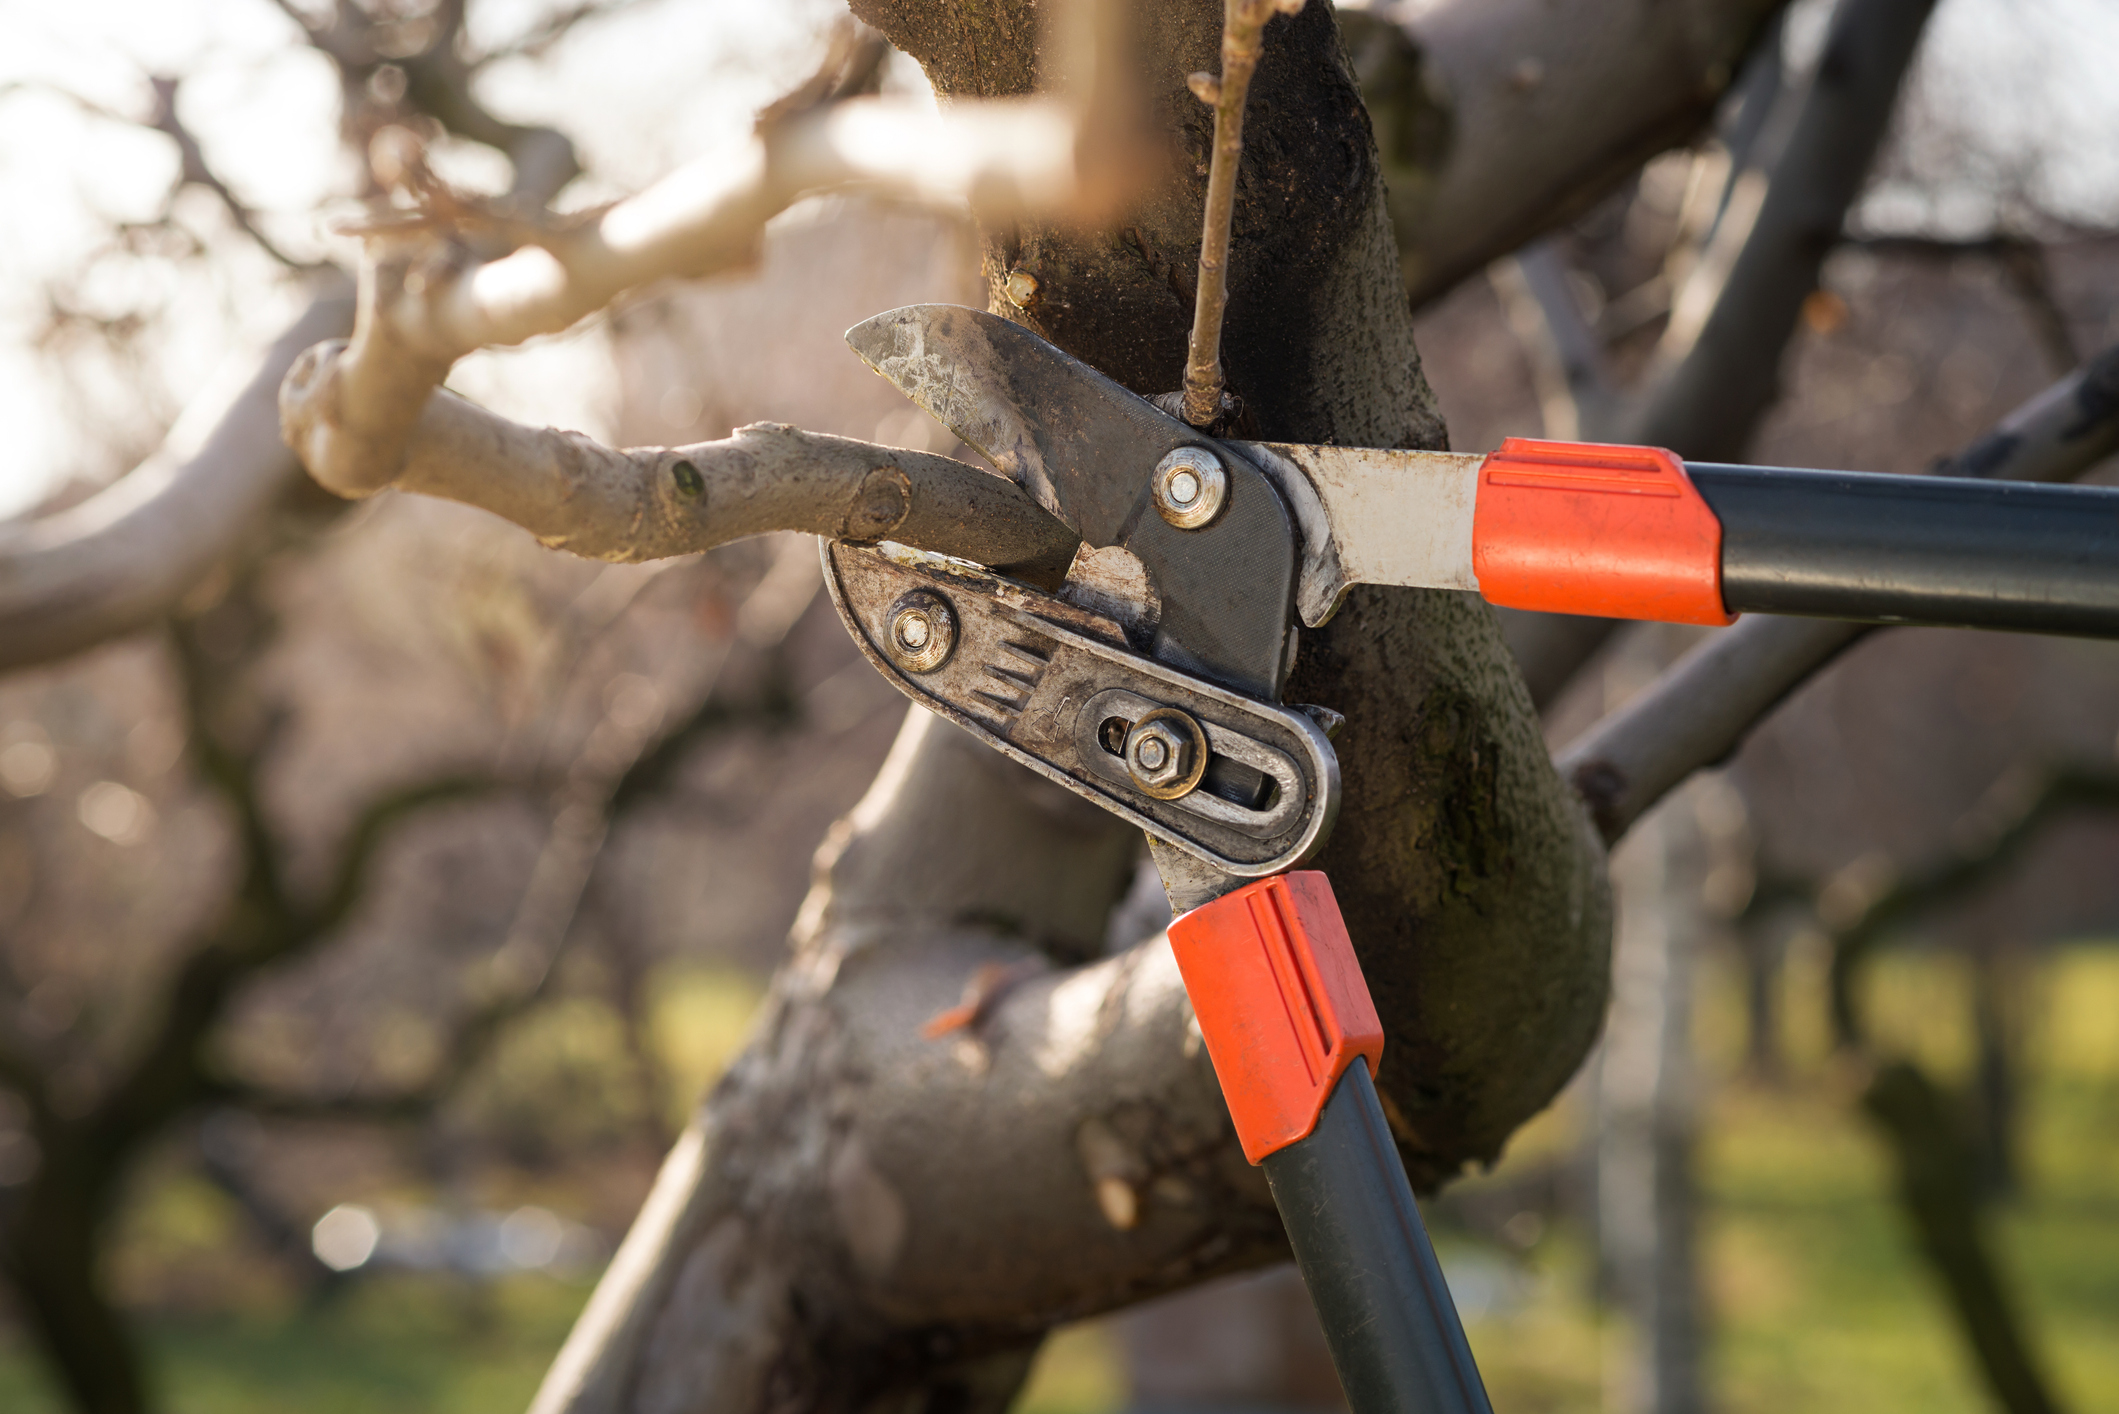 An Easy Guide to Pruning Trees